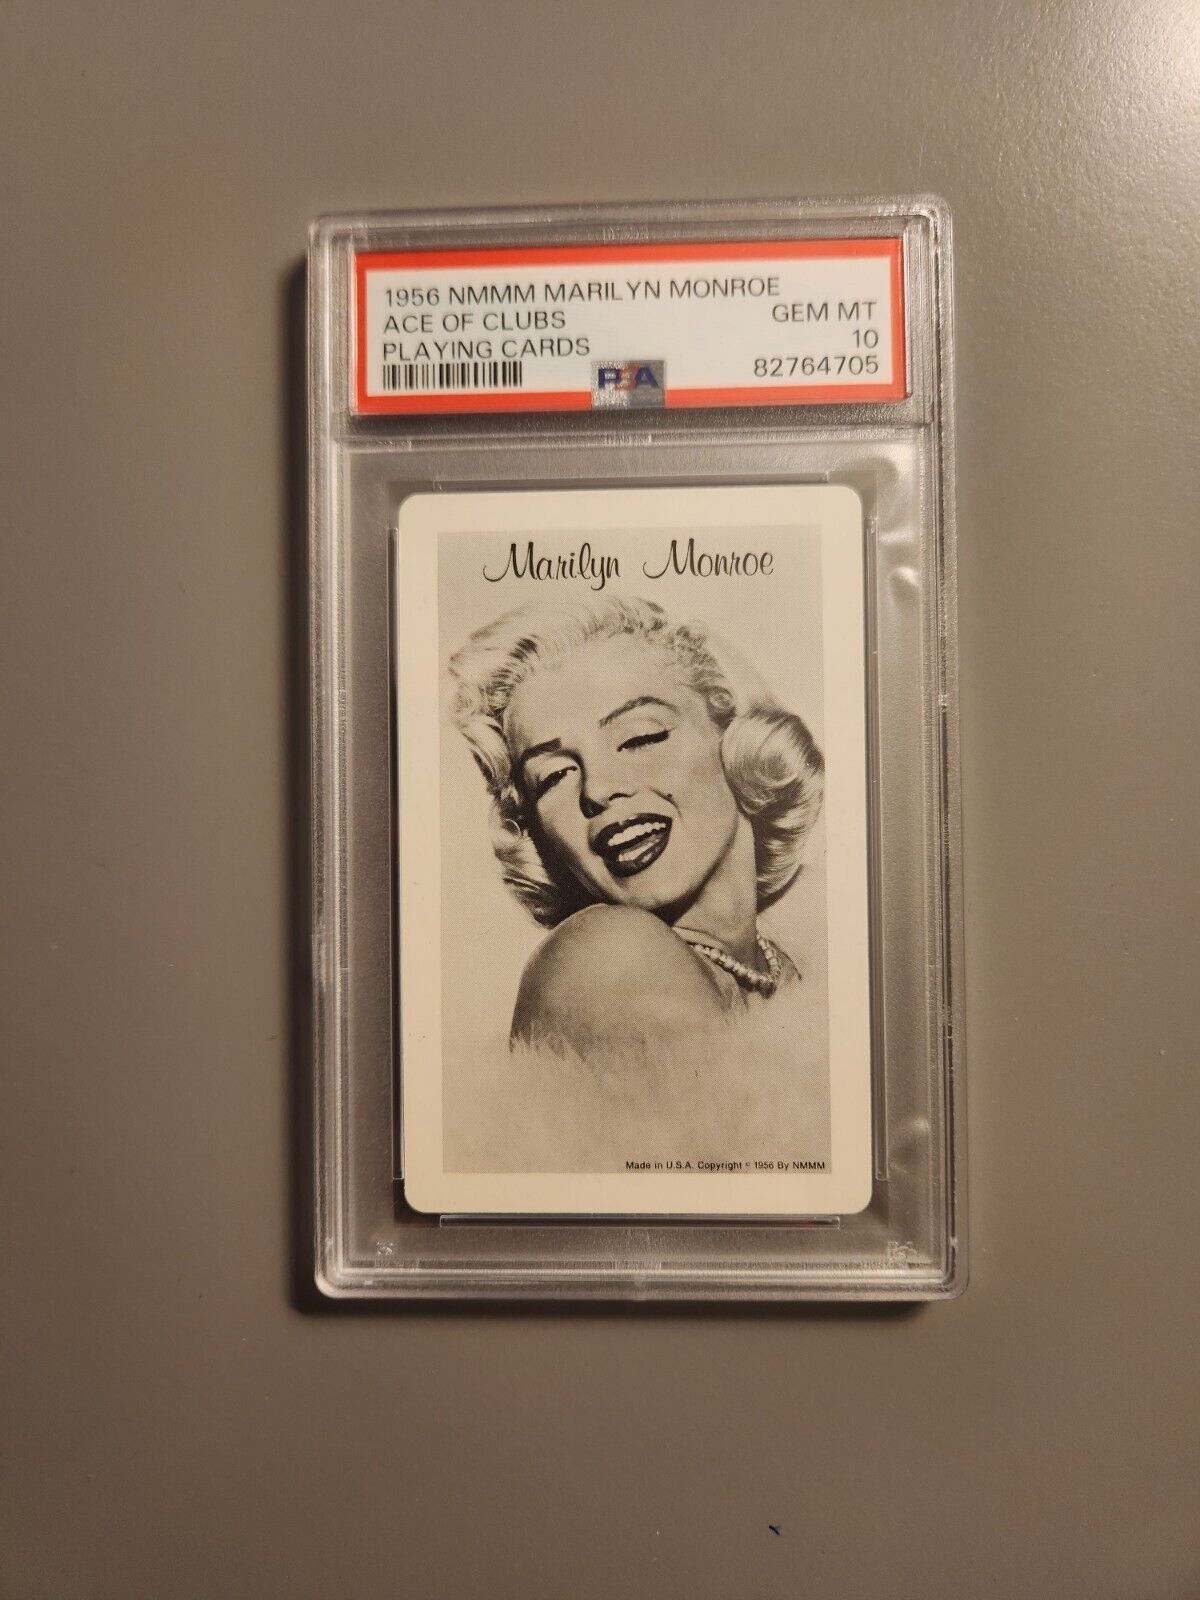 Marilyn Monroe Vintage Playing Card-1956-PSA Gem 10-Ace Of Clubs